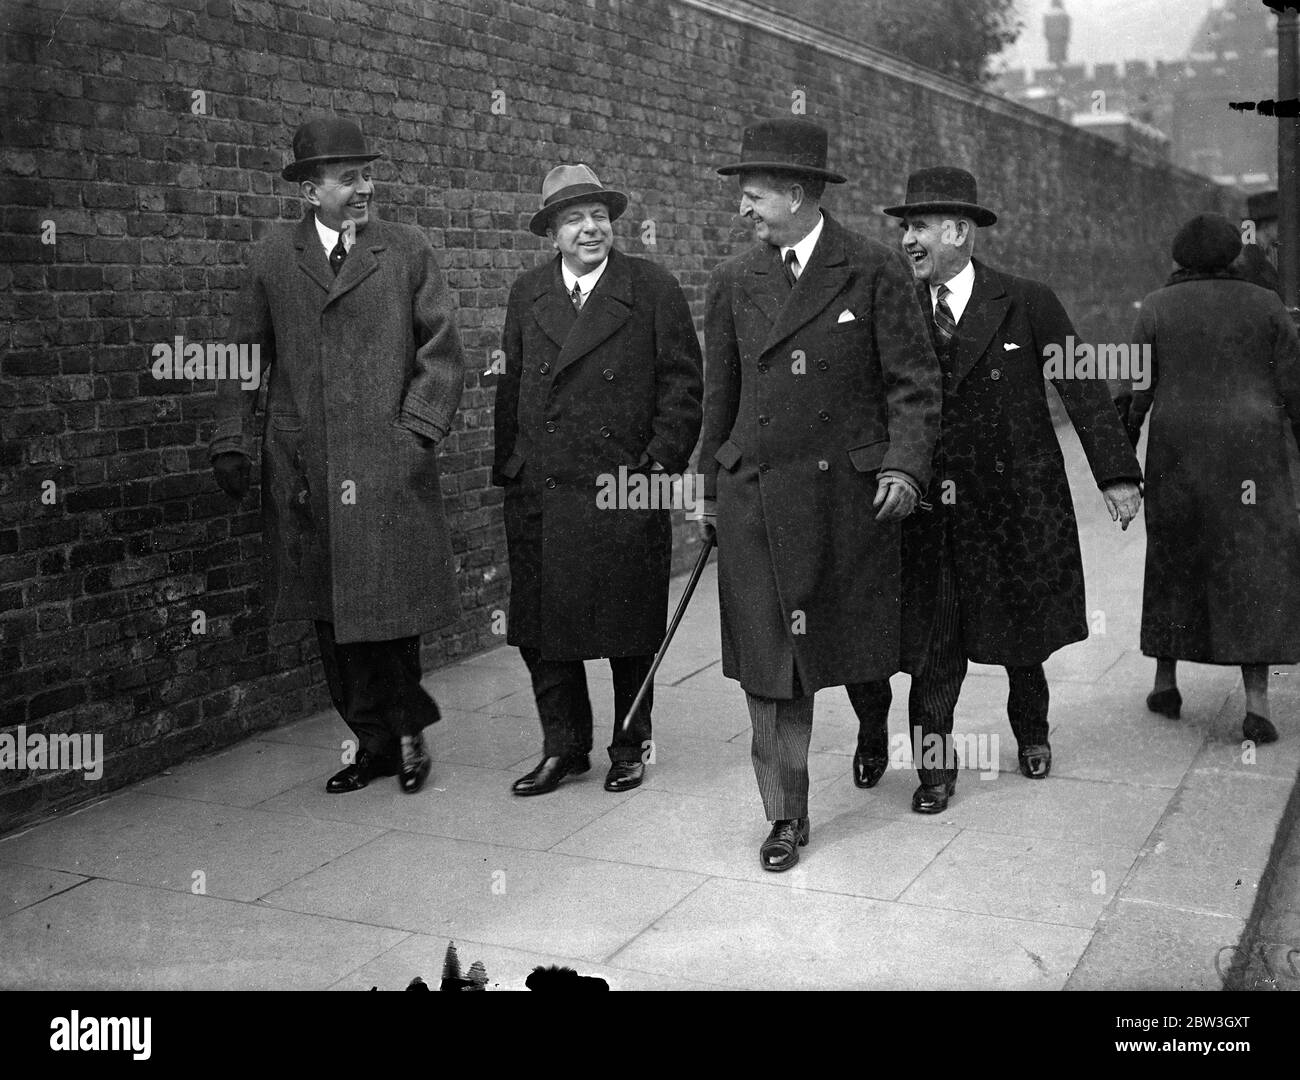 Empire delegates leave after League Council meeting . Delegates left St James Palace after the League Council had met to hear Germany ' s case for the reoccupation of the Rhineland put by Herr von Ribbentrop , chief German delegate . Photo shows , Sir James Parr , High Commissioner for New Newzeland ( extreme right ) and Mr Te Water , High Commissioner for South Africa , ( second from right ) leaving after the meeting . 19 March 1936 Stock Photo